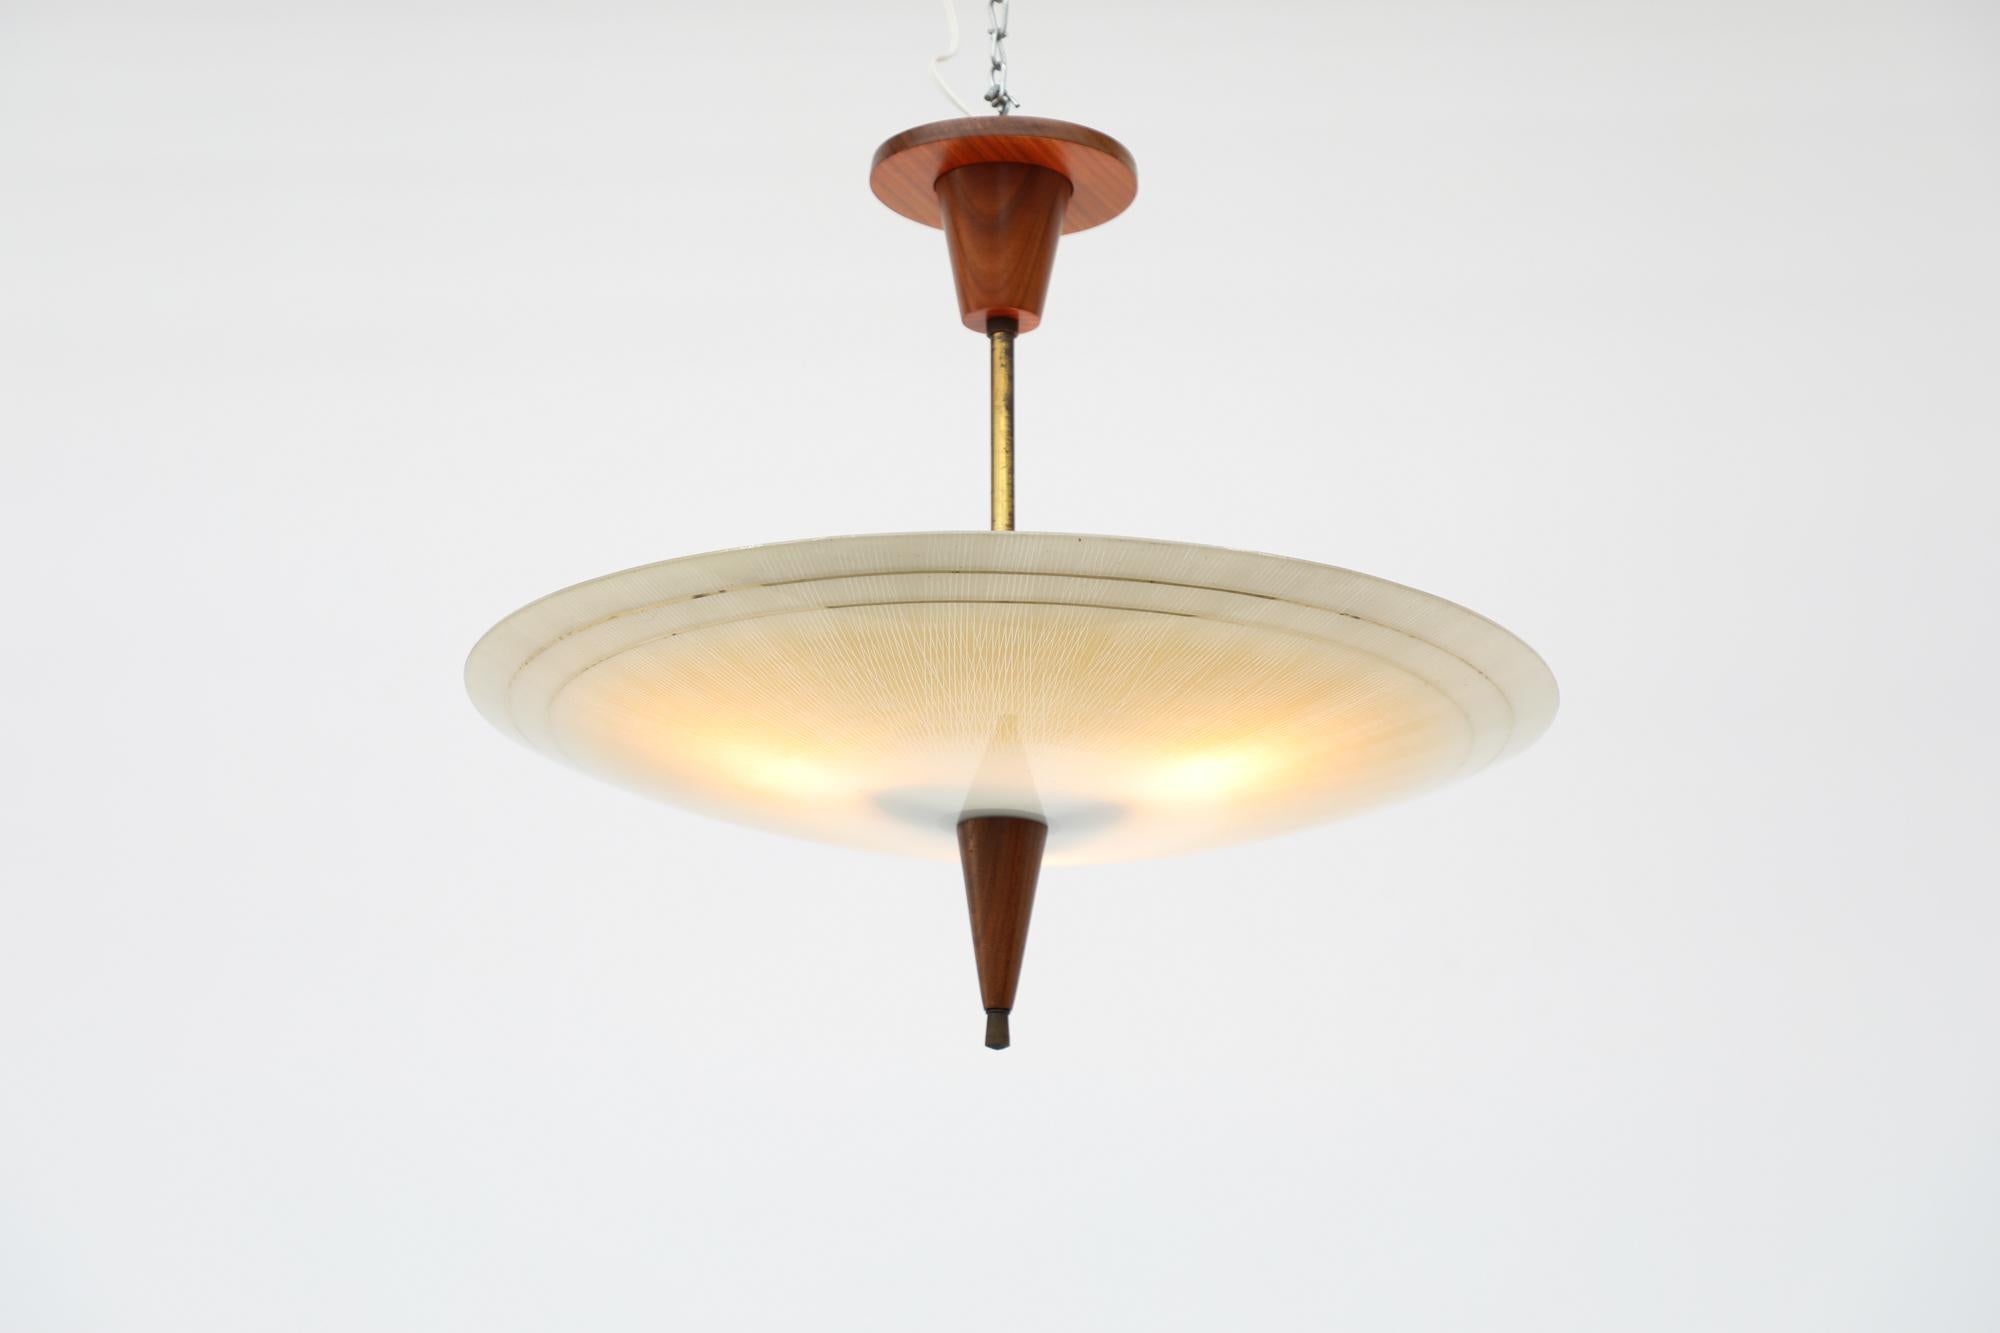 Mid-Century Modern 1950s Glass Rondelle Ceiling Pendant with Patterned Glass, Teak & Brass Details For Sale